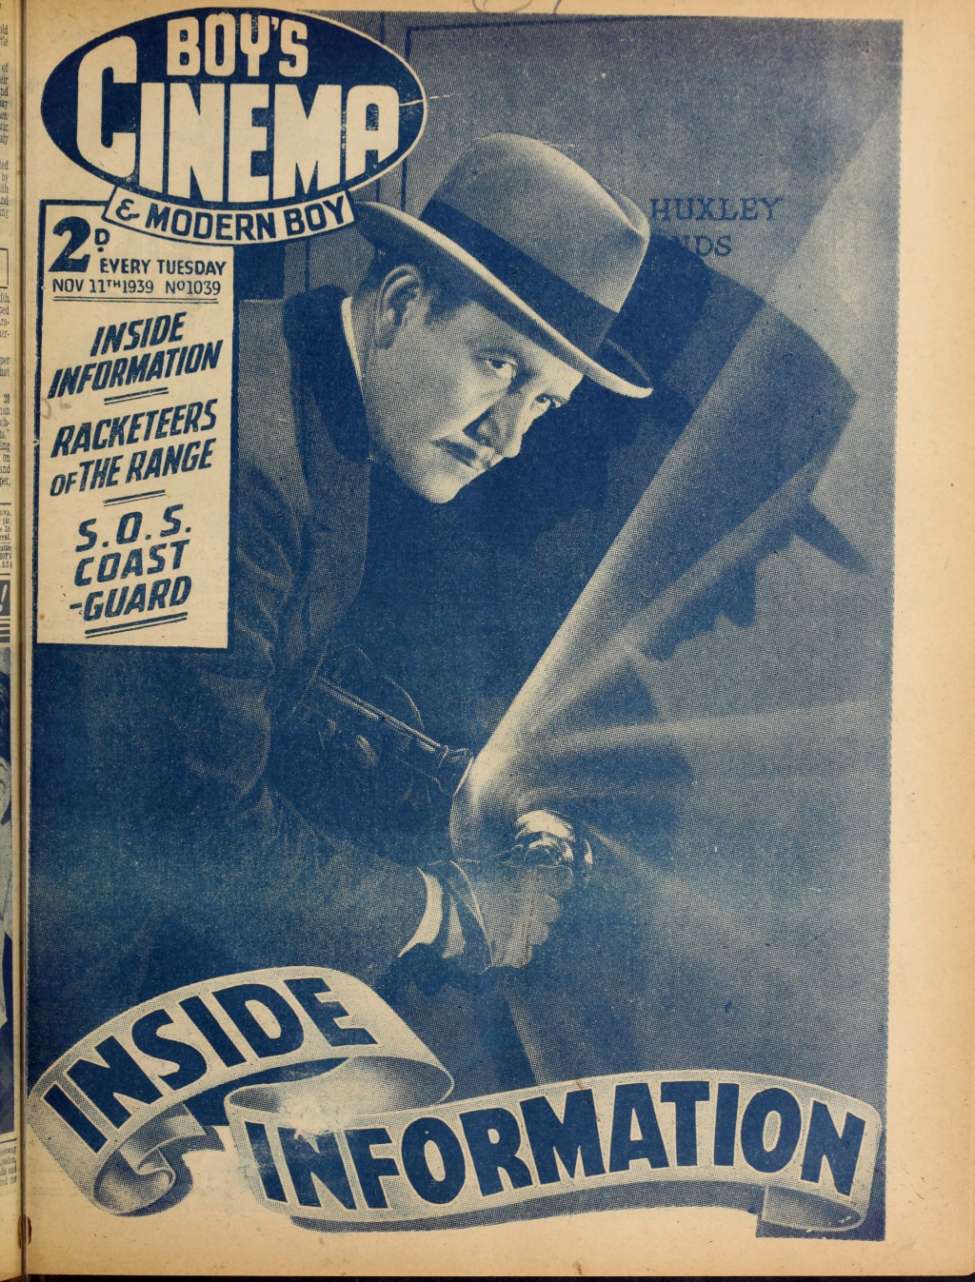 Comic Book Cover For Boy's Cinema 1039 - Inside Information - Harry Carey